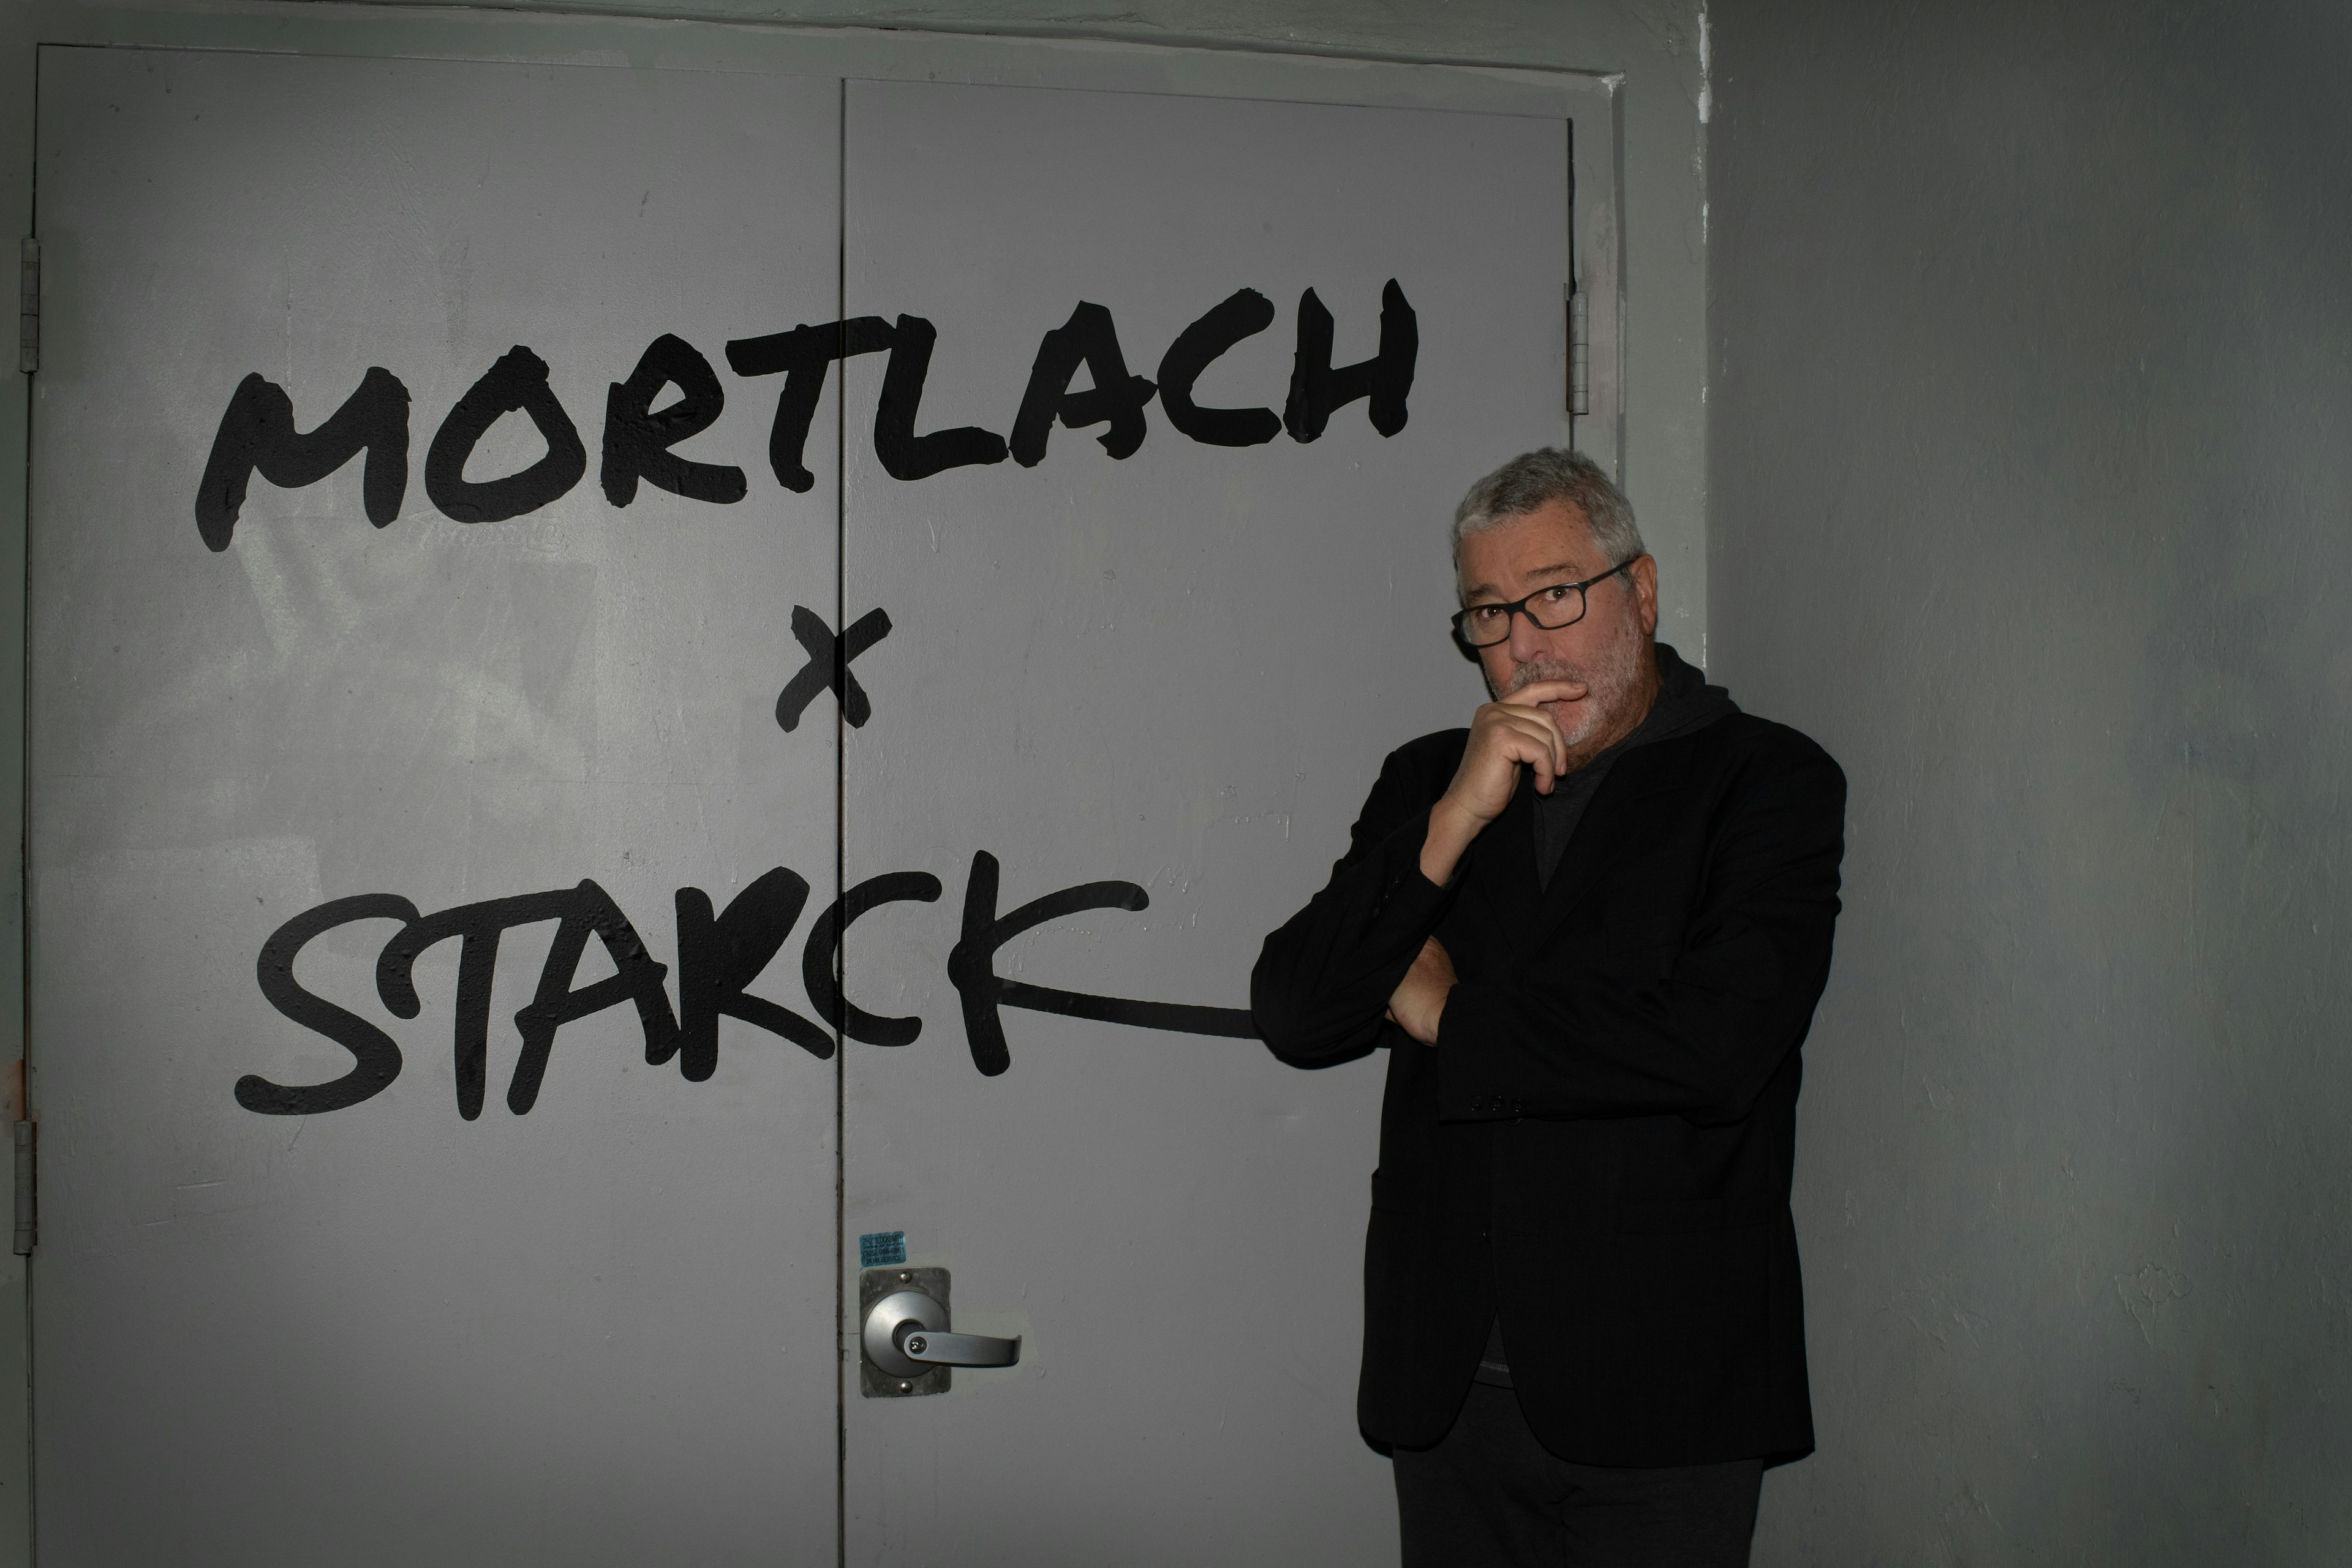 Philippe Starck outside the Mortlach x Starck event during Miami Art Basel. Image: Mortlach